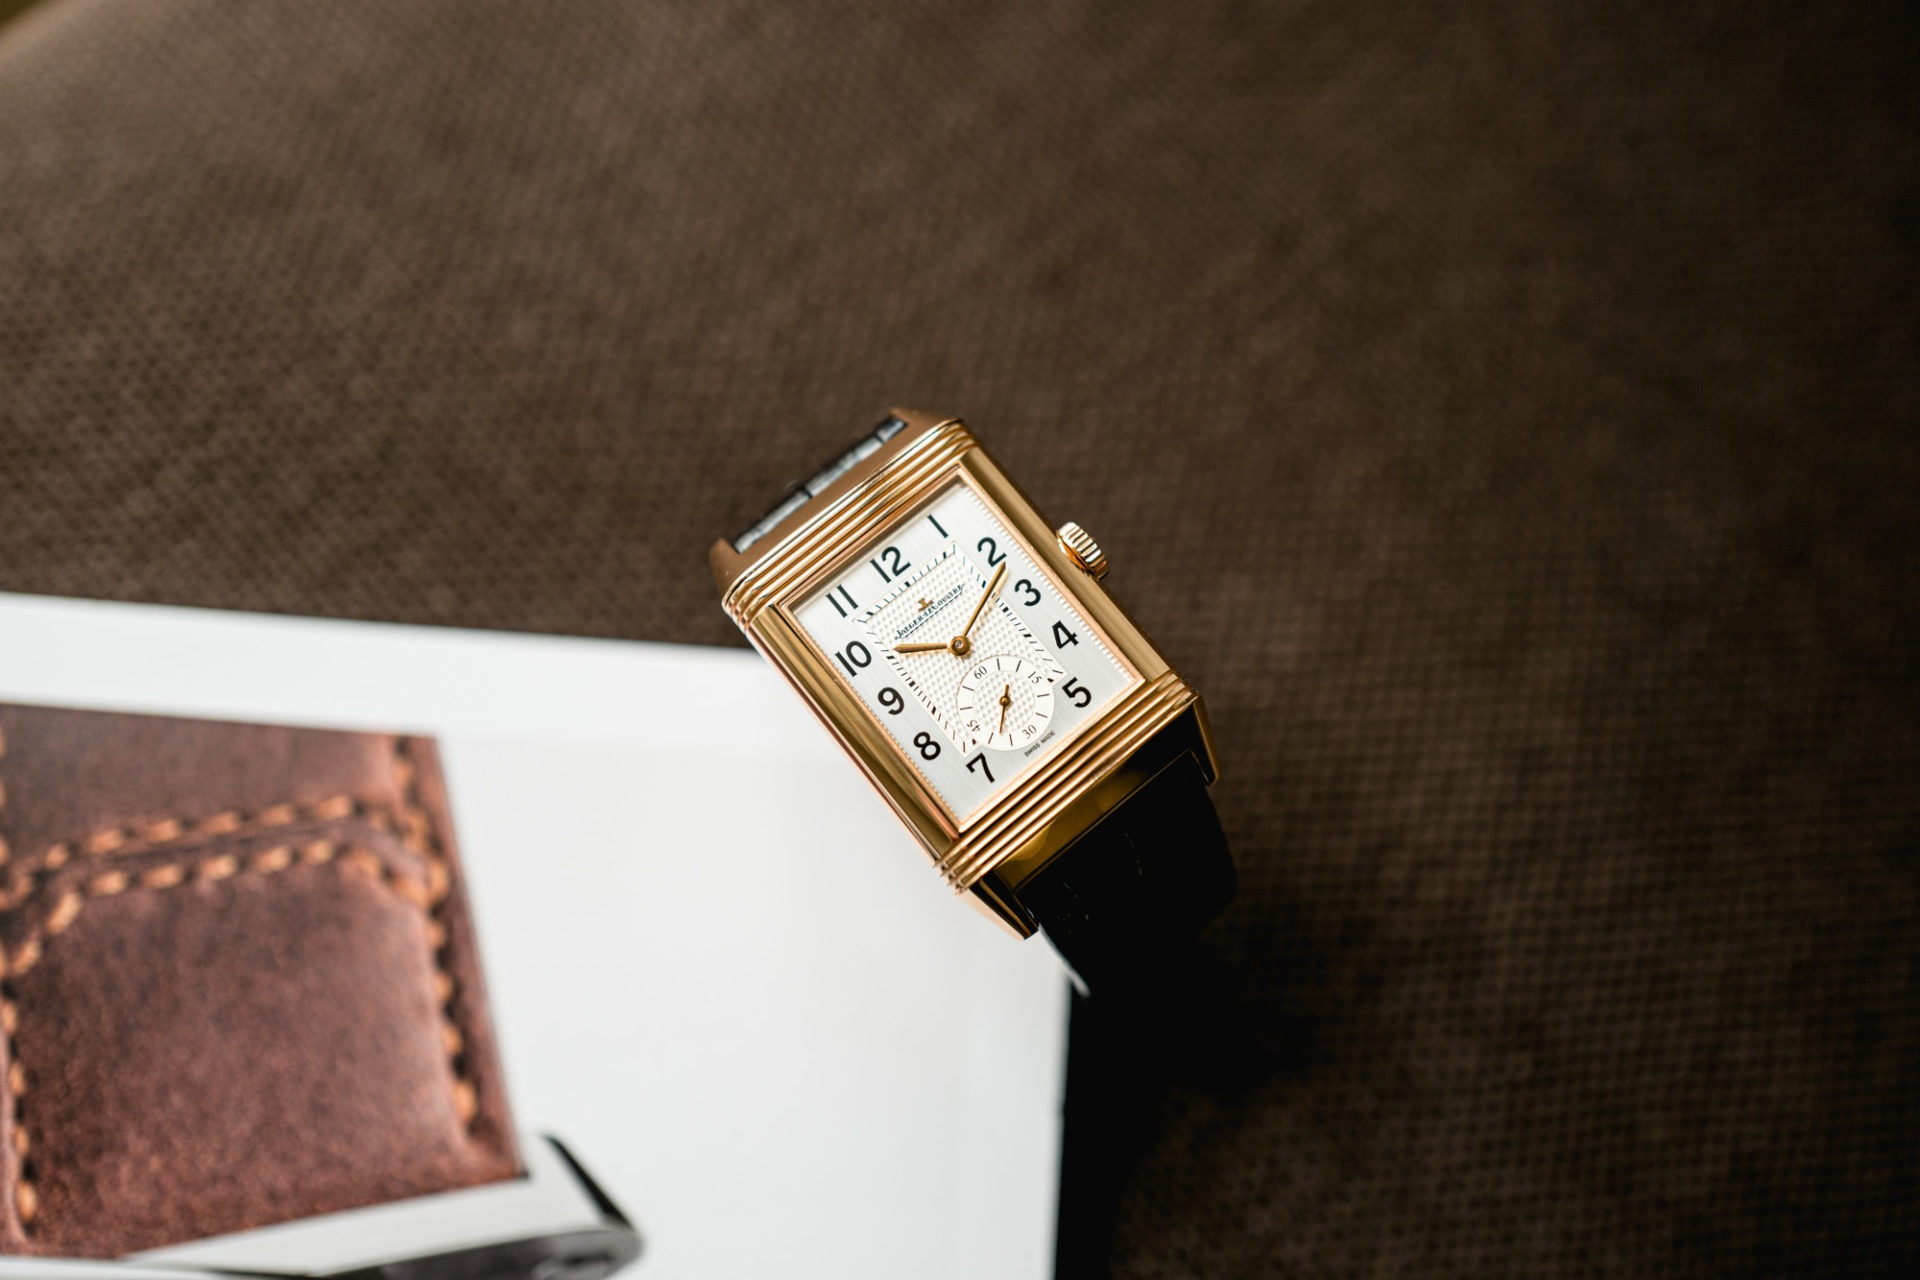 Jaeger-LeCoultre Reverso Classic Large Duoface Small Seconds